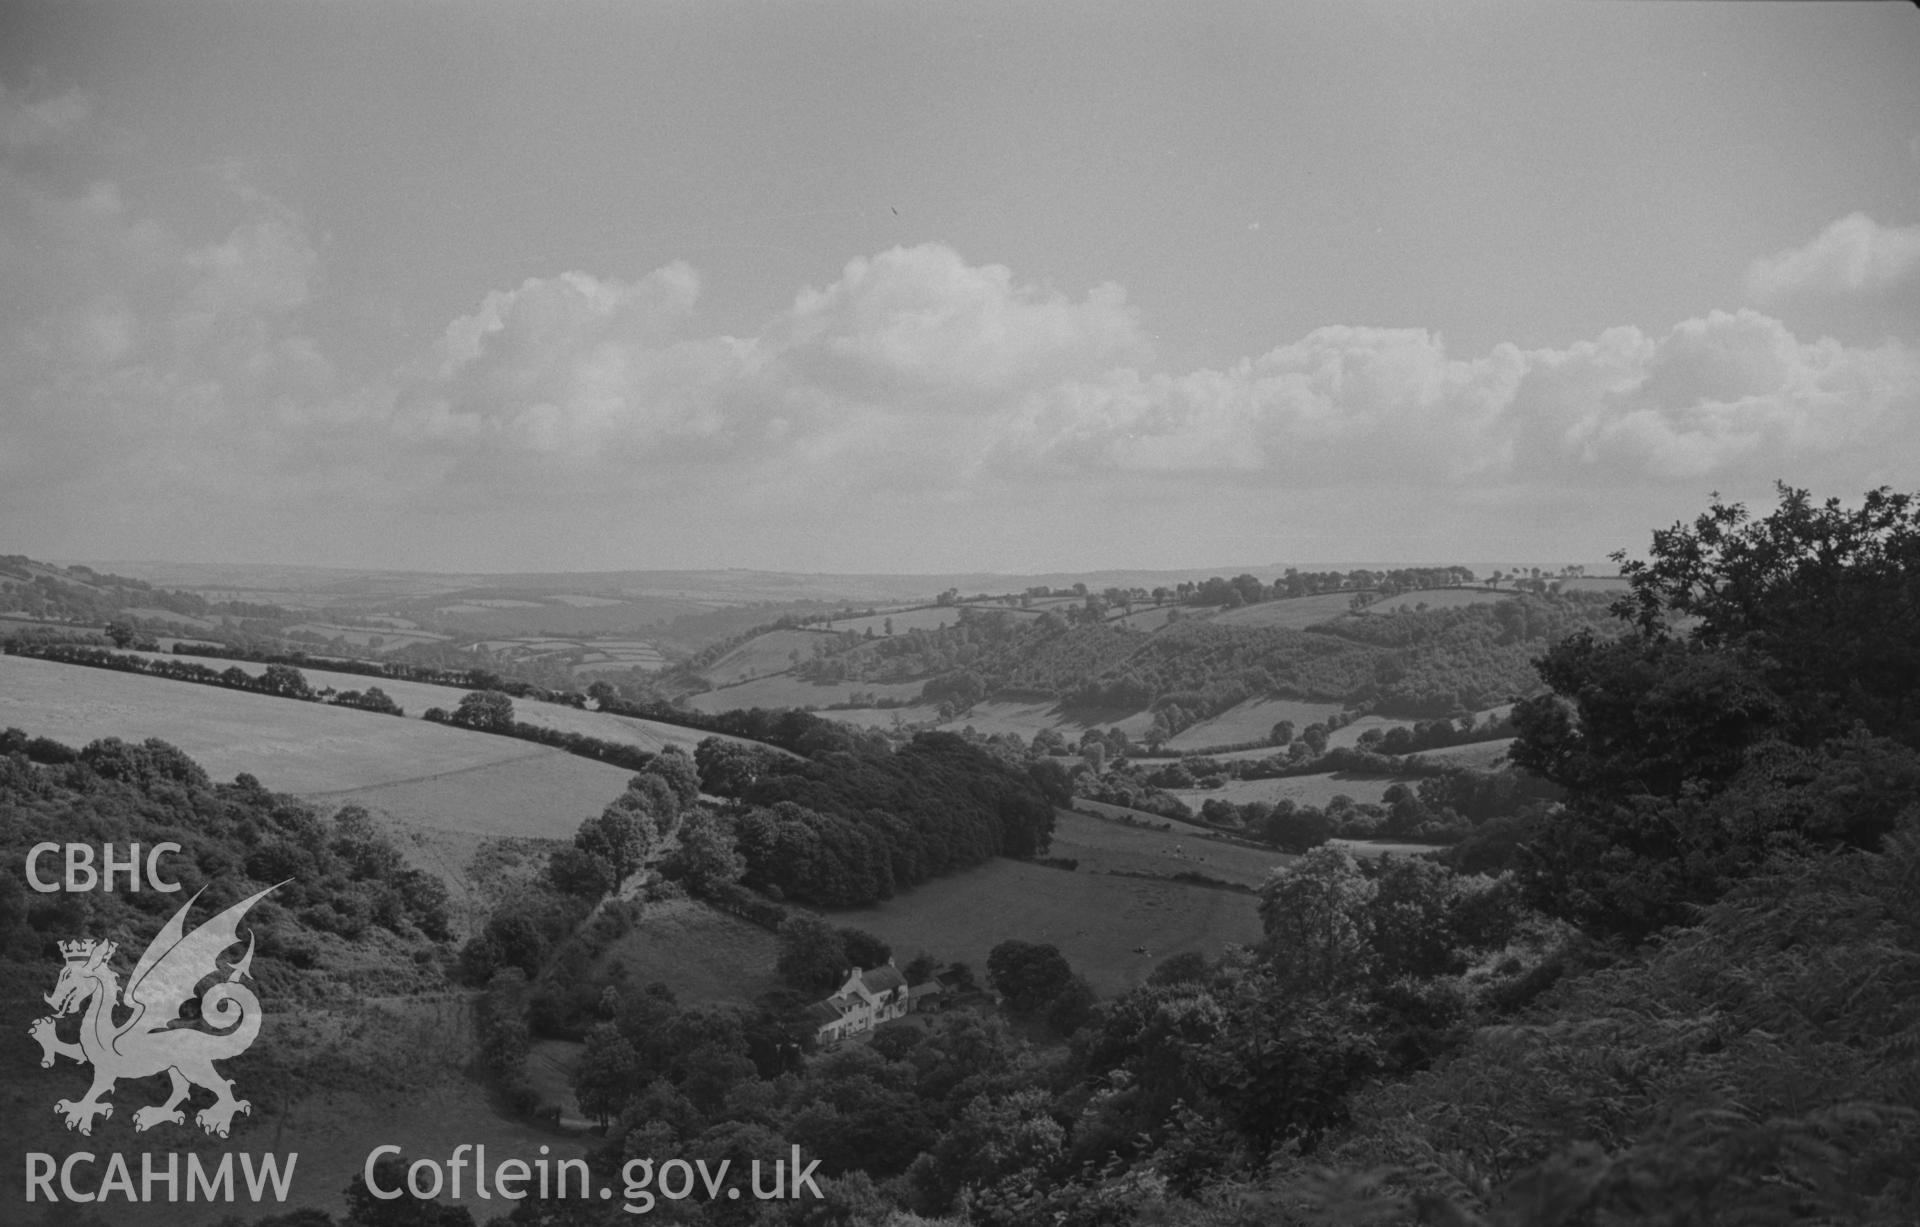 Digital copy of black and white negative showing view looking down to Dyffryn Llynod and, beyond, the Cerdin valley from near the site of St. Ffraid's church. Photographed by Arthur O. Chater on 19th August 1967, looking south south east from SN 405 459.